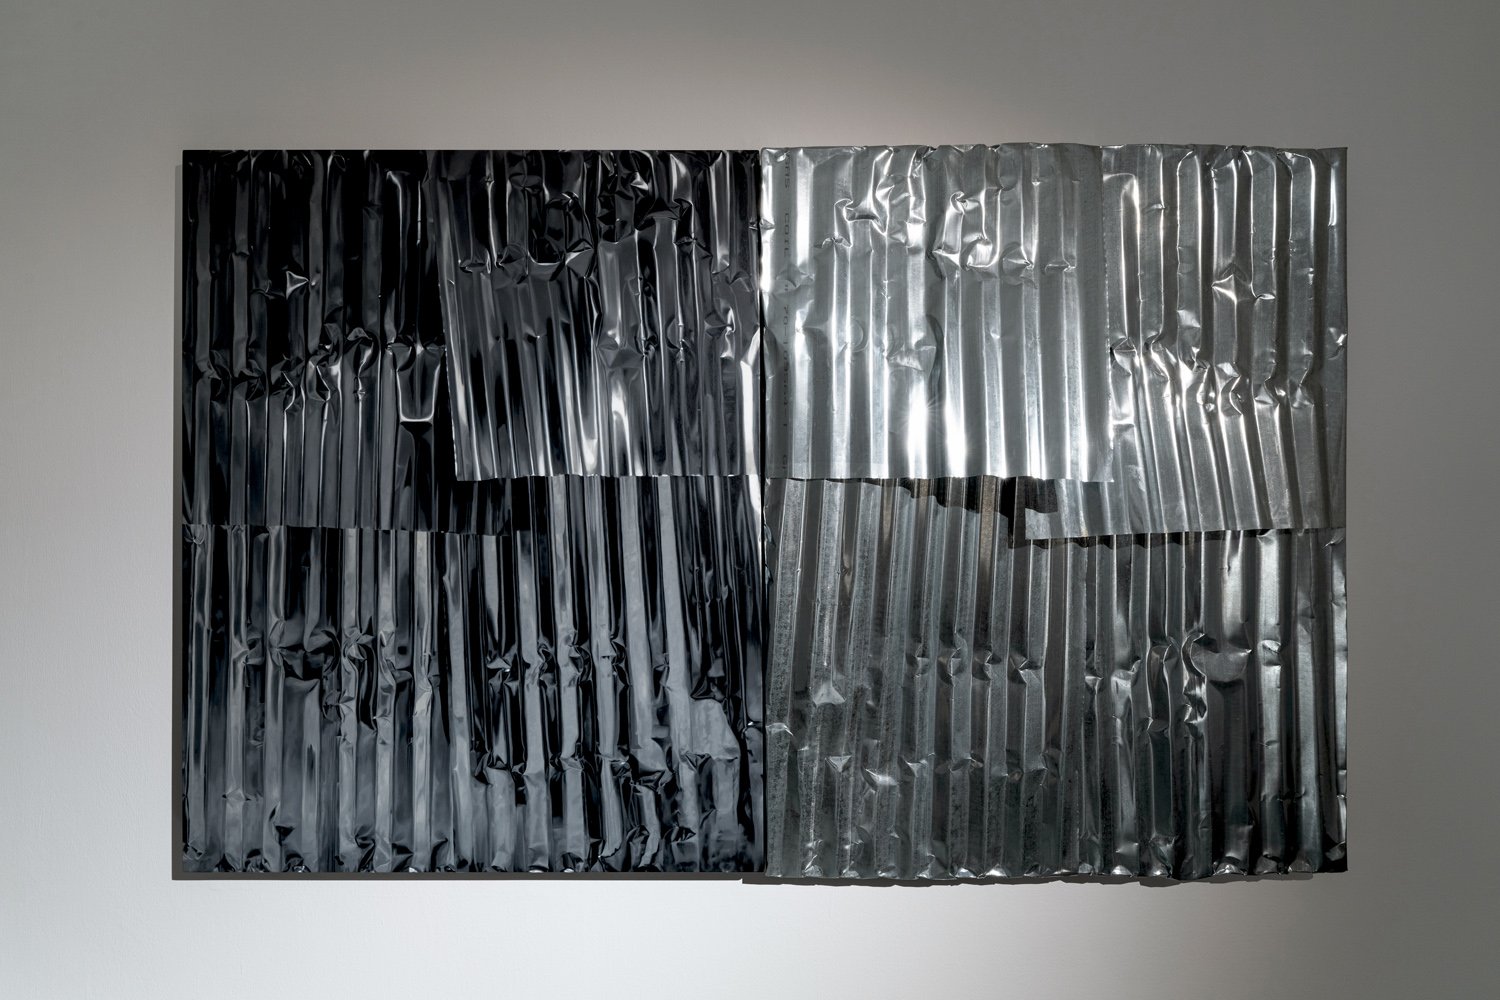  Luis Antonio Santos    Untitled (Structures)   2023  Oil on canvas and distorted galvanized iron sheet   H152.4 x W243.8 cm (diptych)  